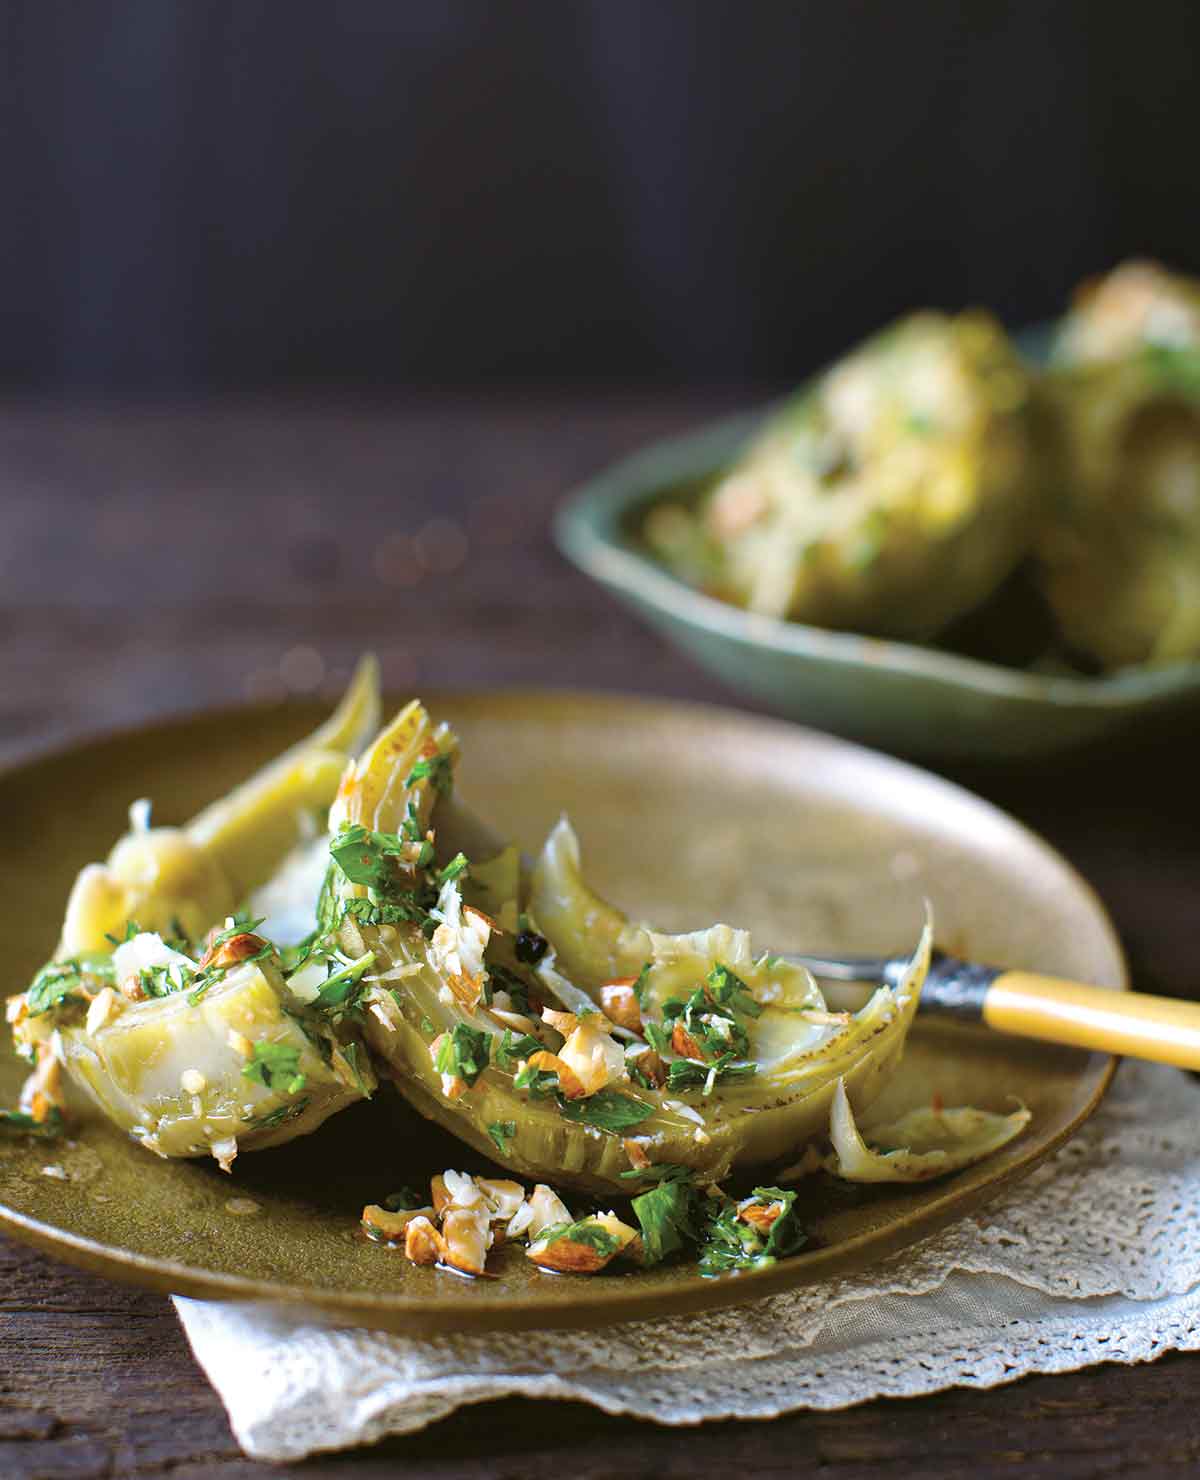 Braised artichokes on a plate, sprinkled with chopped almonds and parsley.